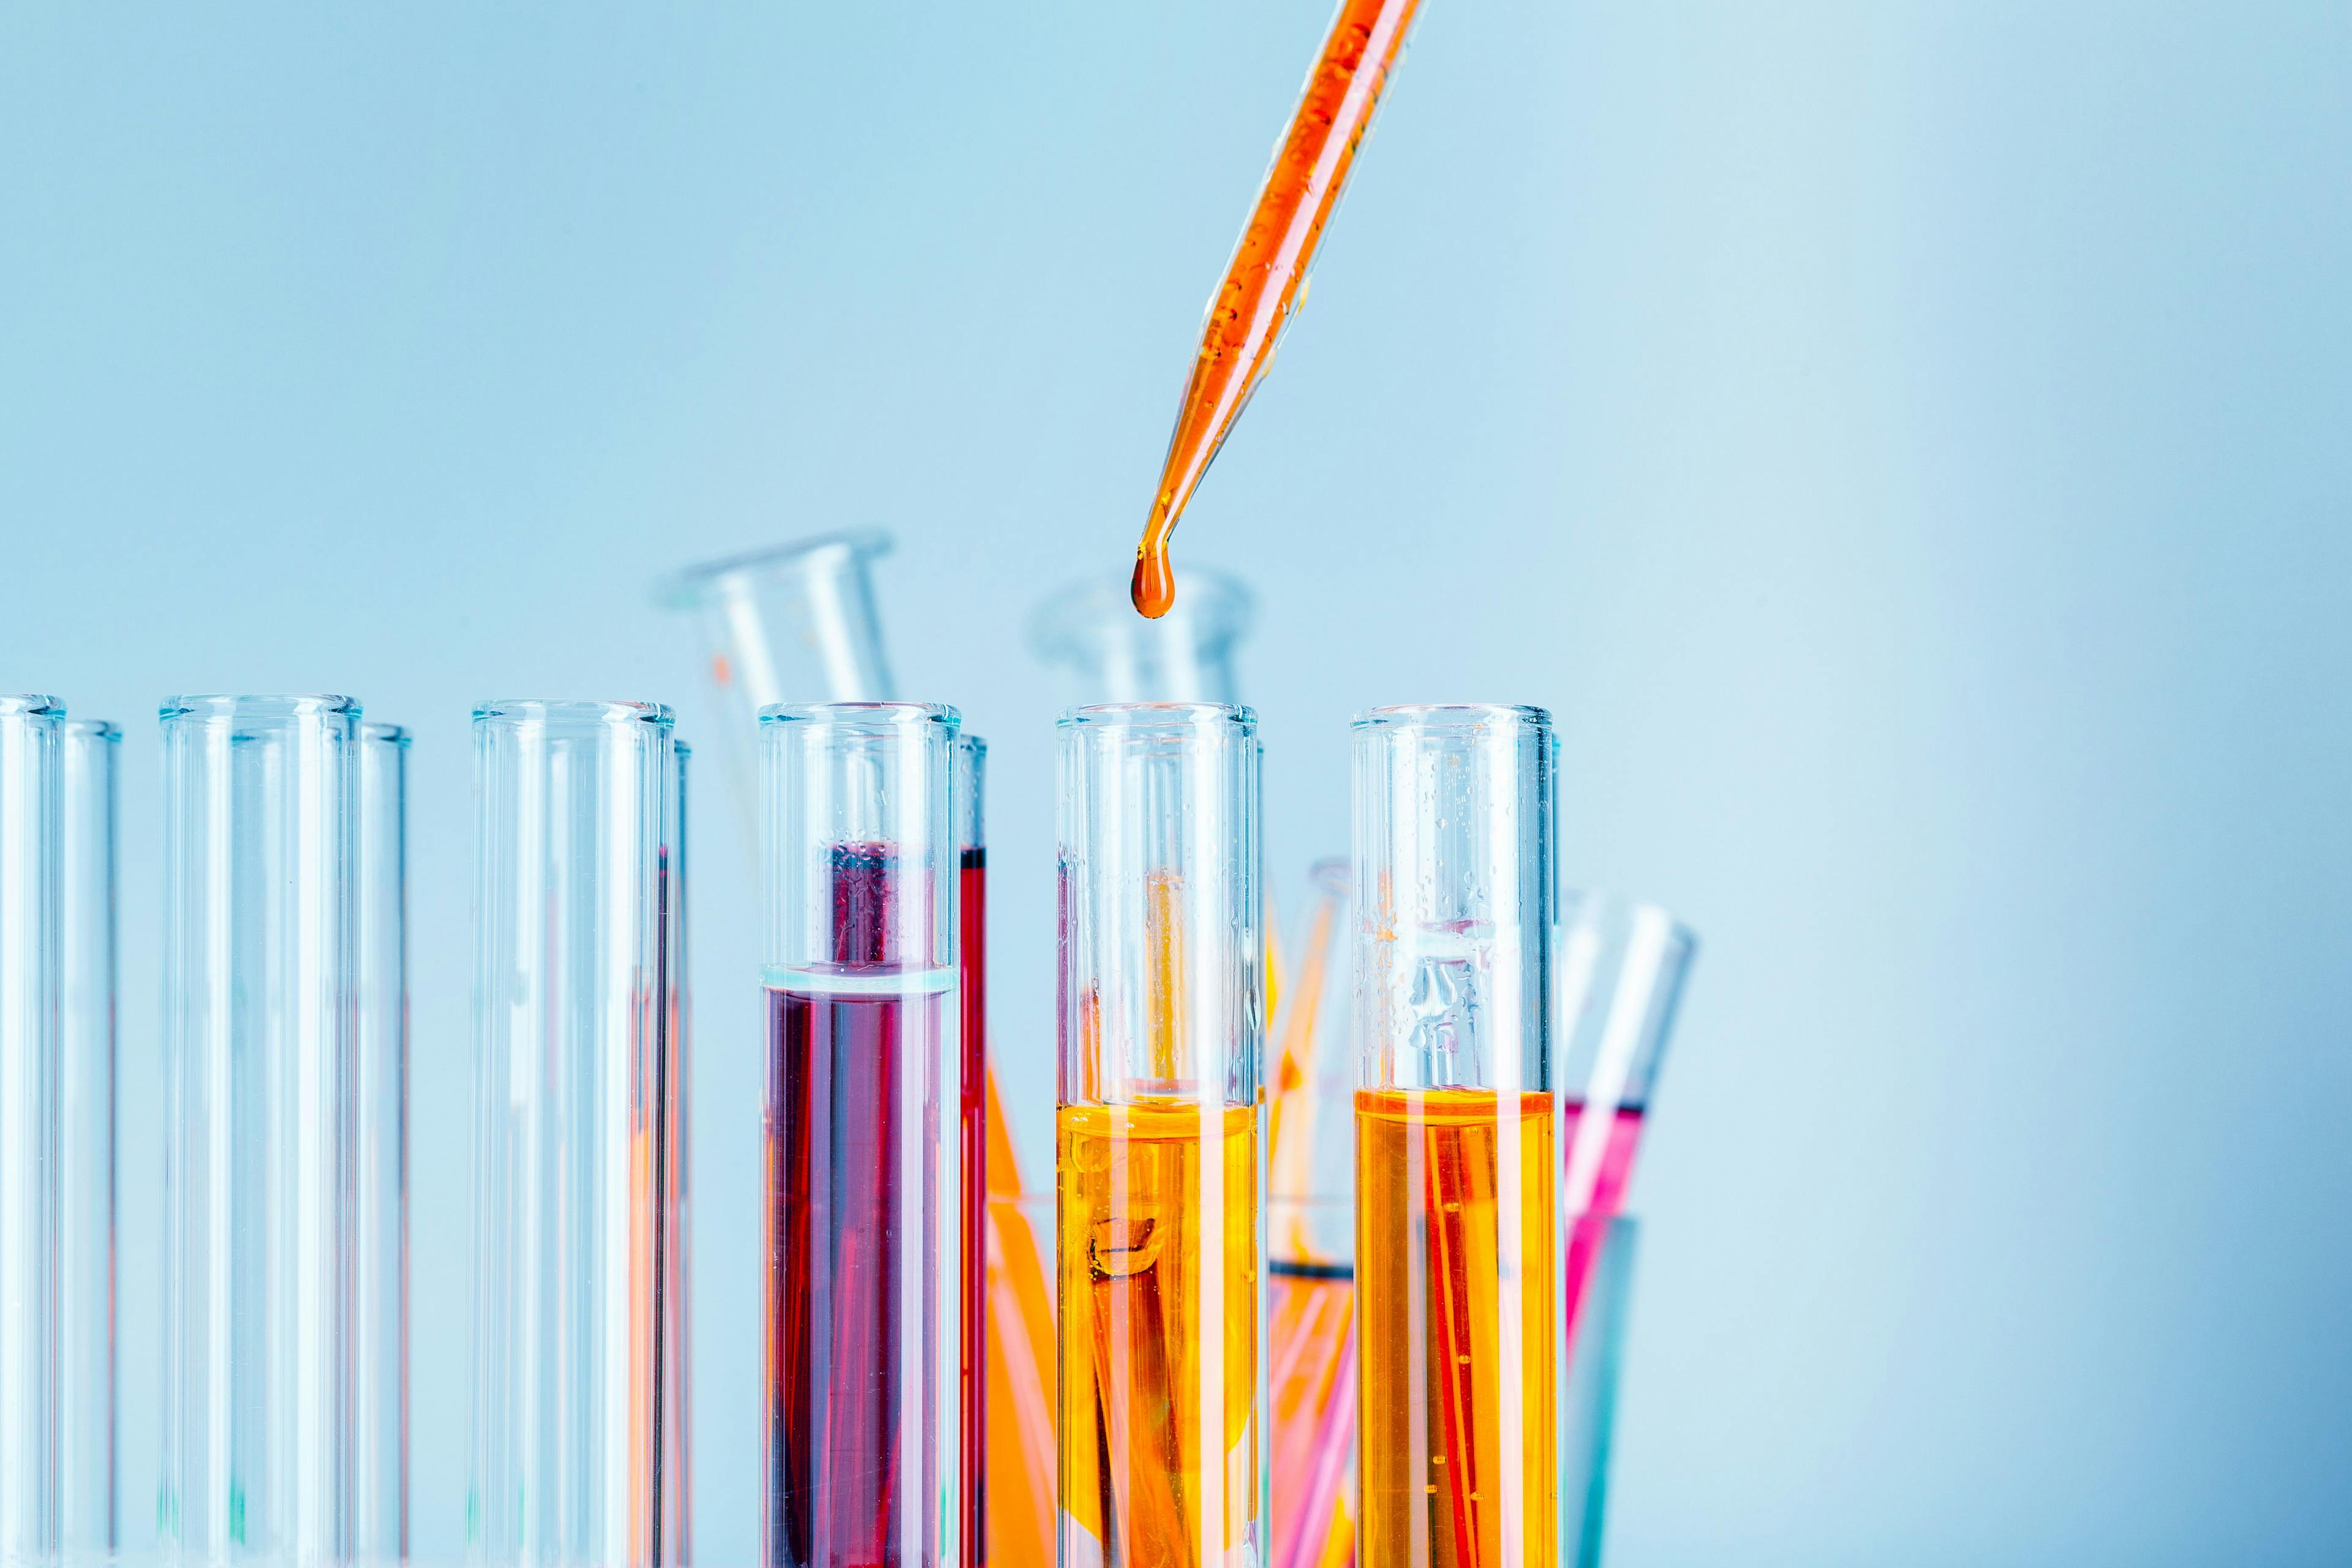 test tubes with colored liquid | Image credit: fotofabrika - stock.adobe.com